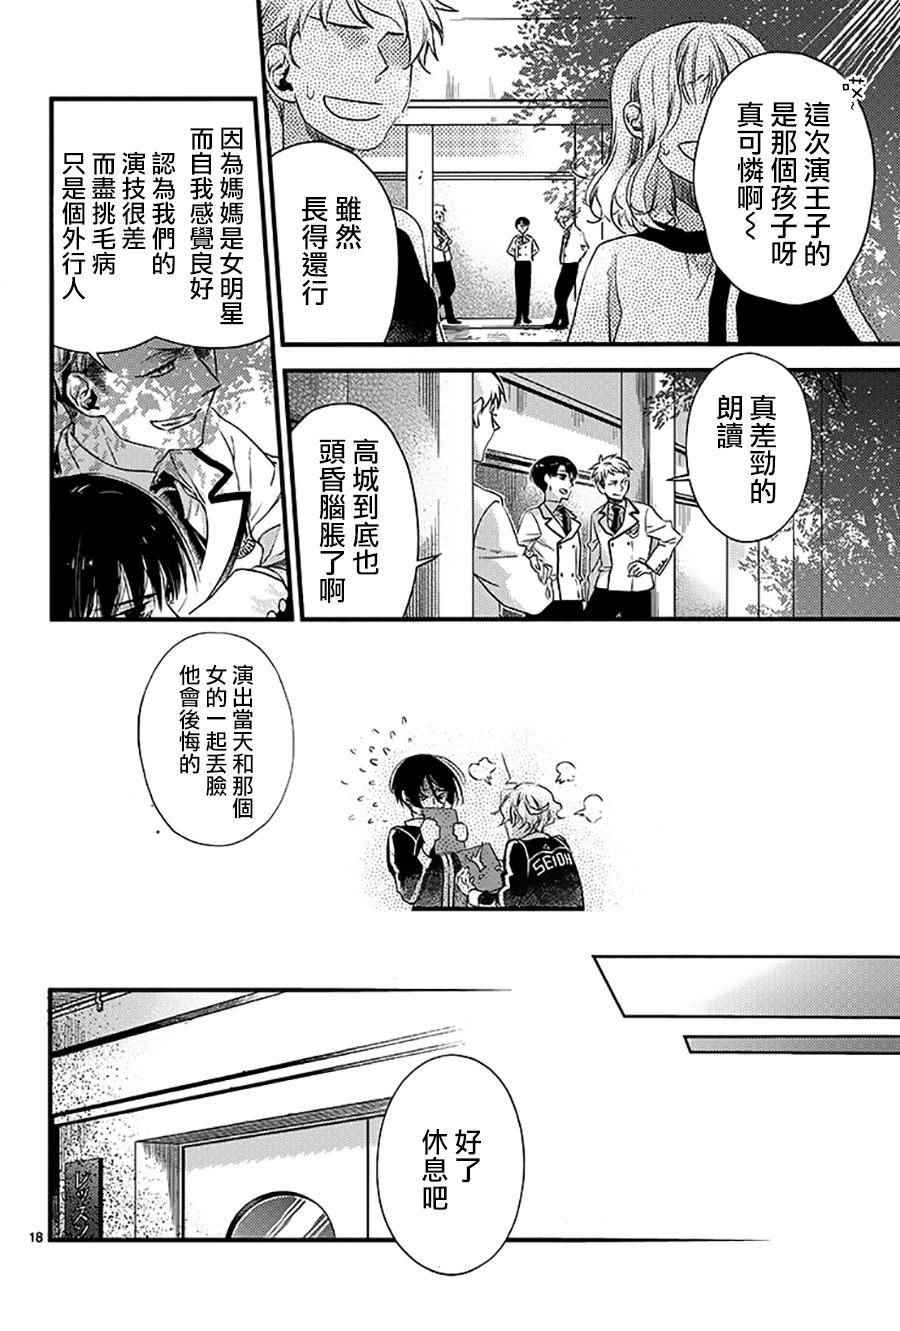 《On Stage》漫画 001集